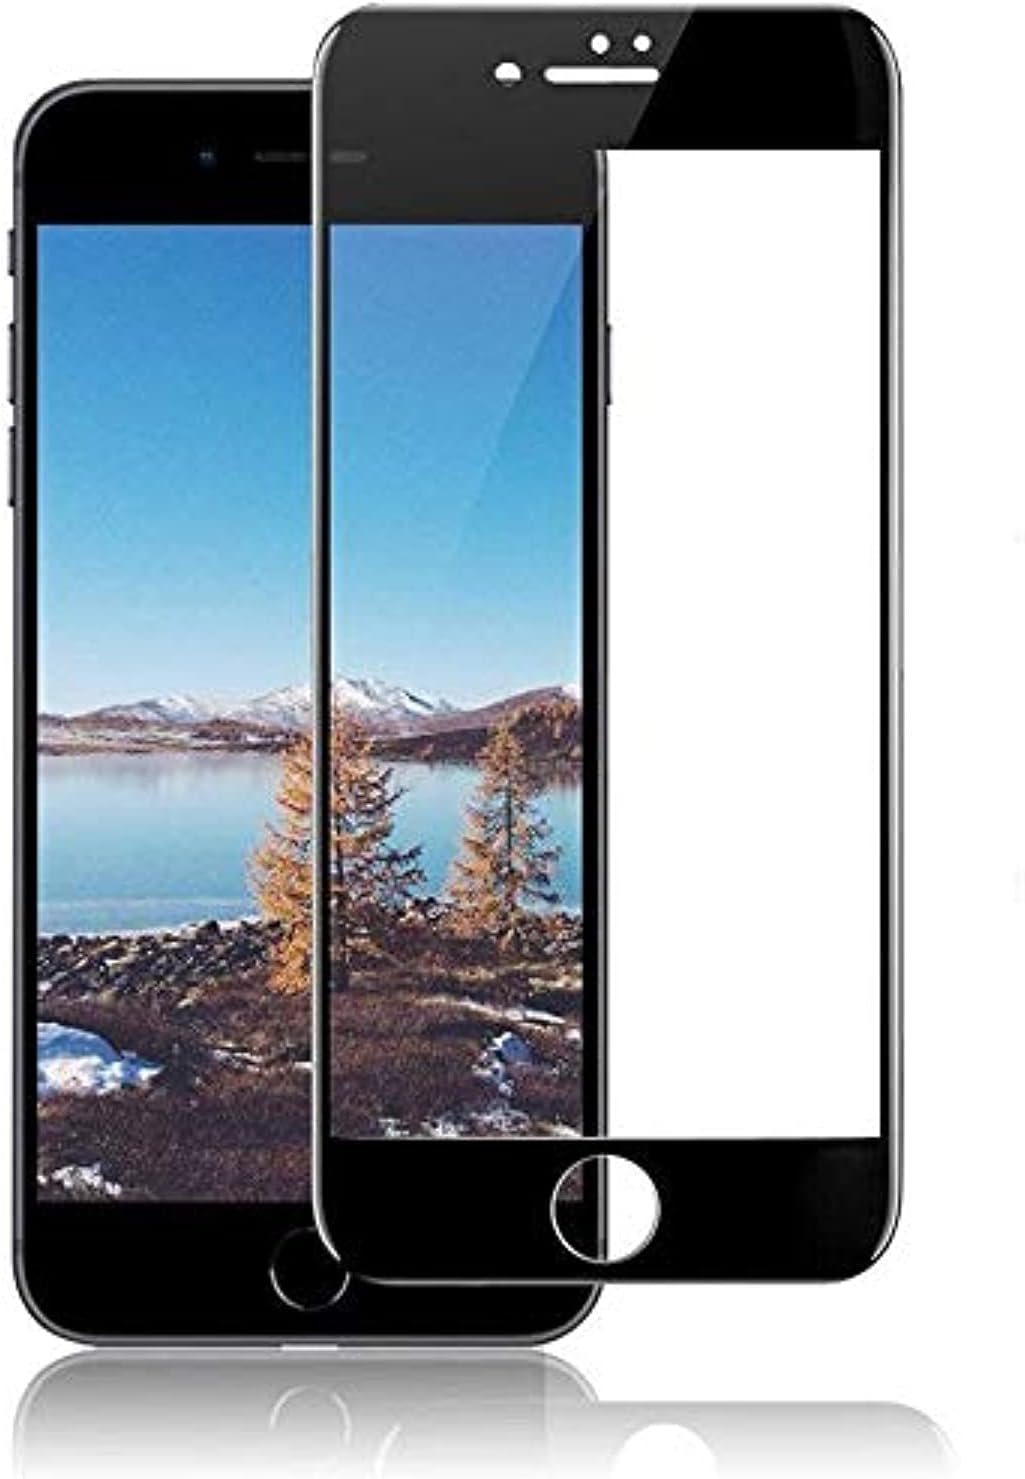 Meidom 5D Tempered Glass Screen Protector for iPhone 8 Plus, iPhone 7 Plus - Transparent with Black Frame